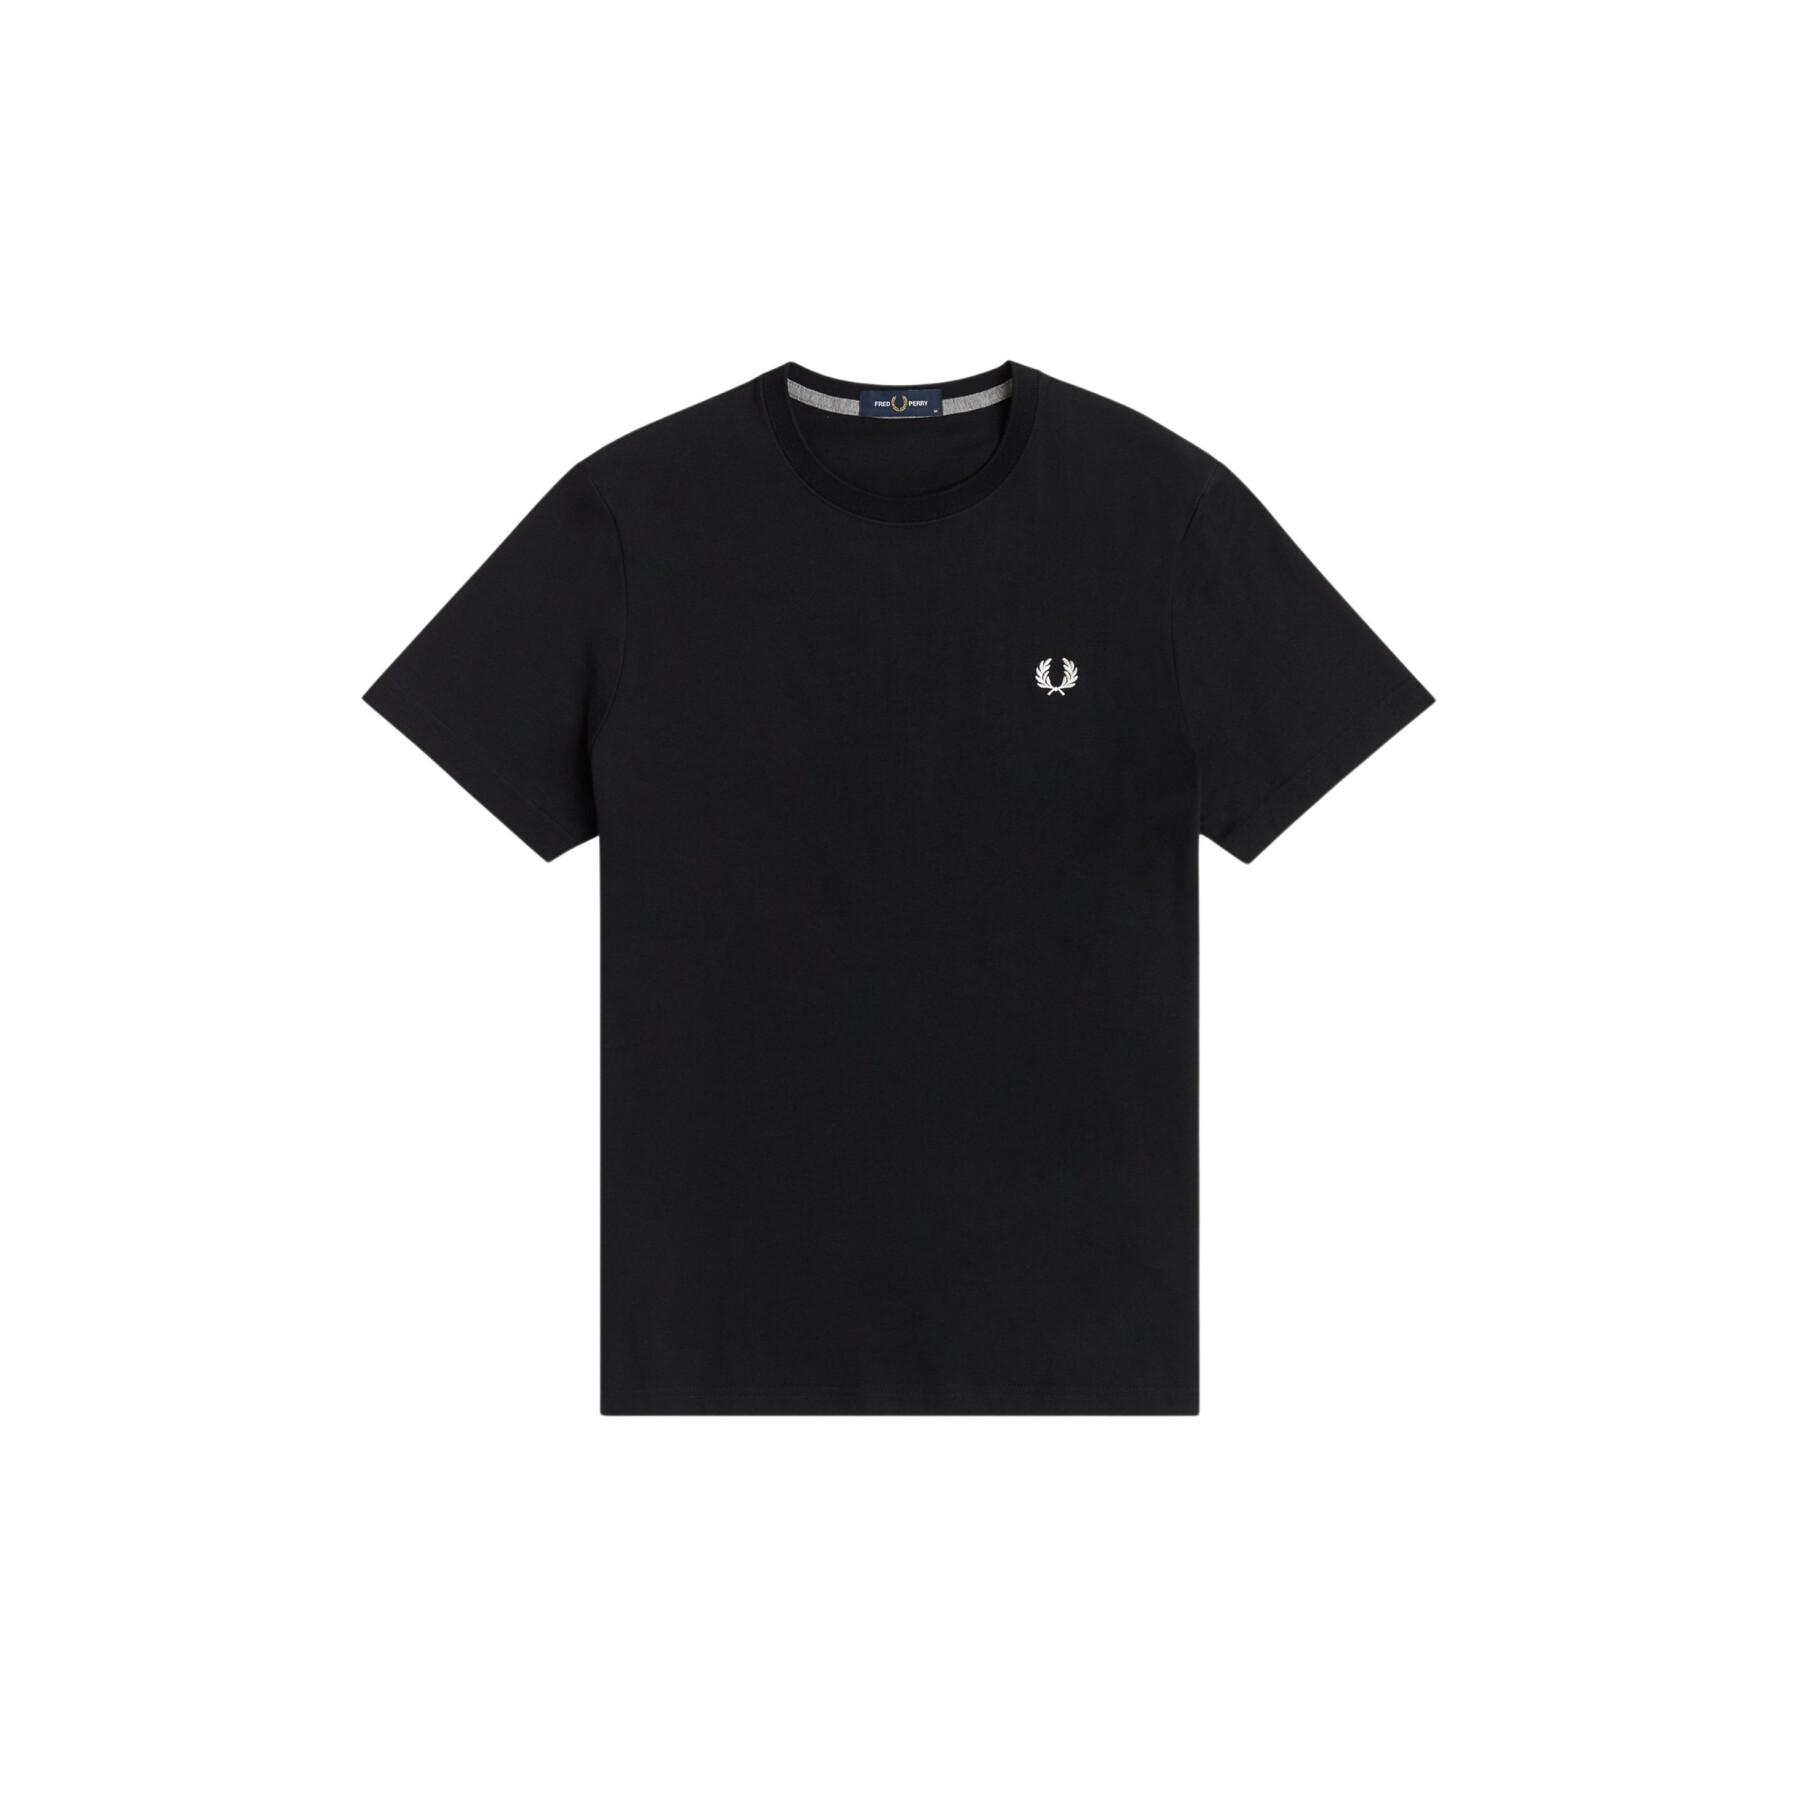 Camiseta Fred Perry